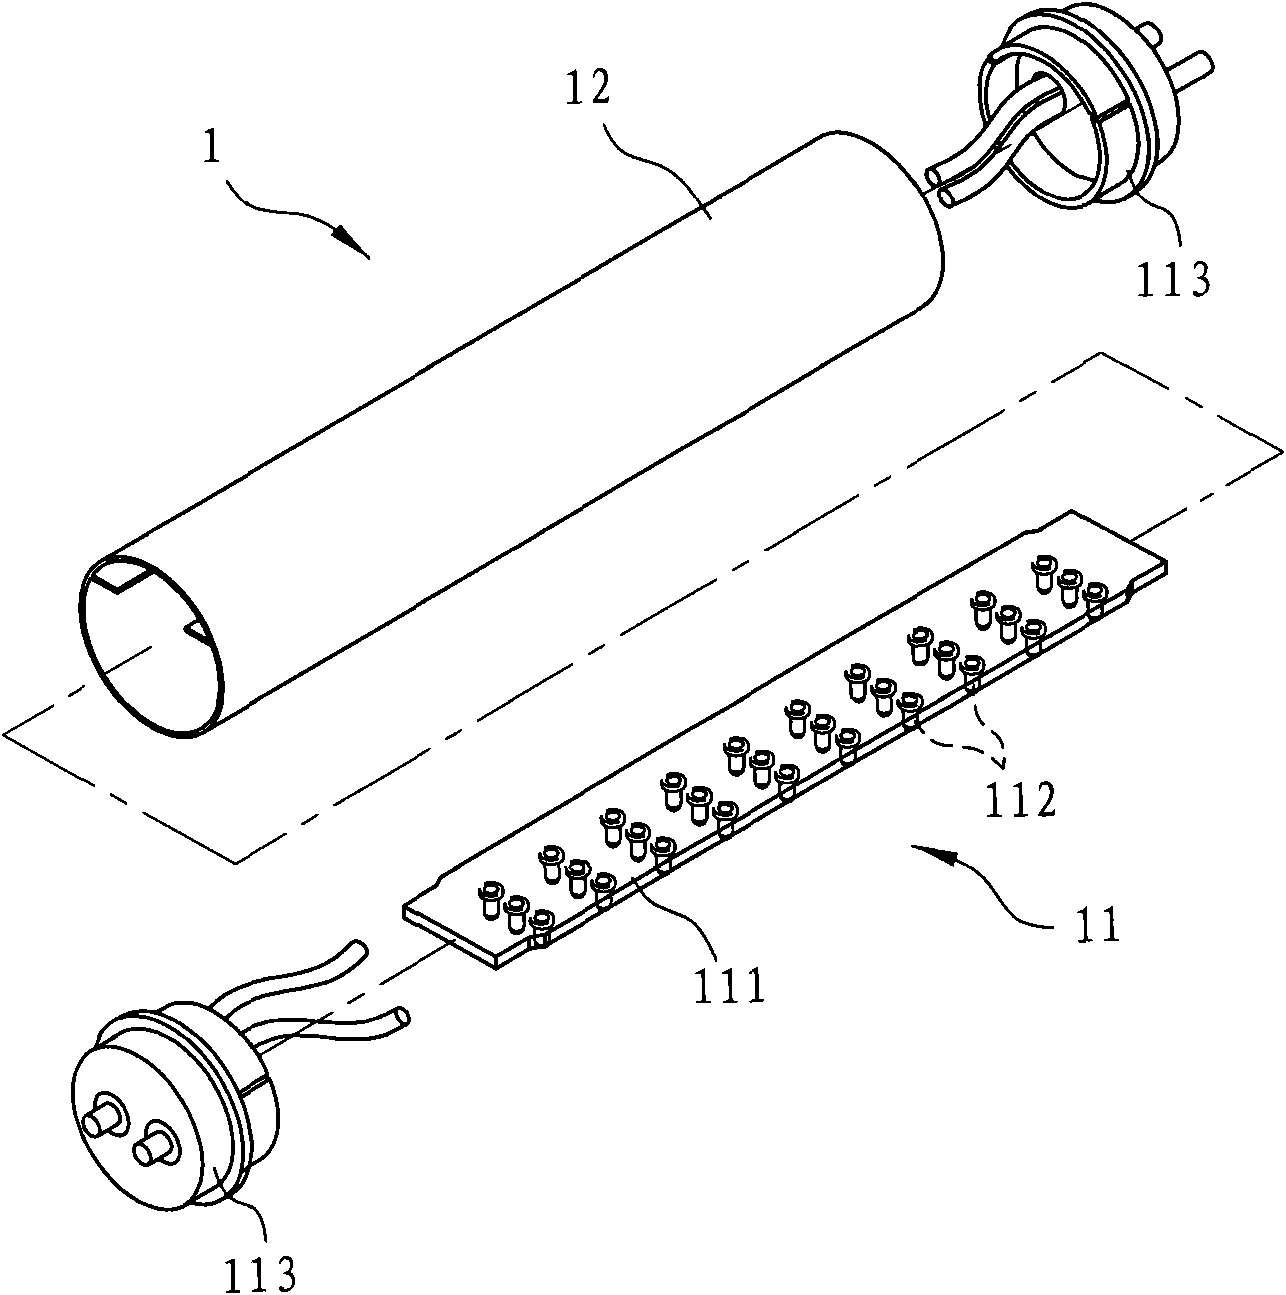 Strip lamp device of light emitting diode